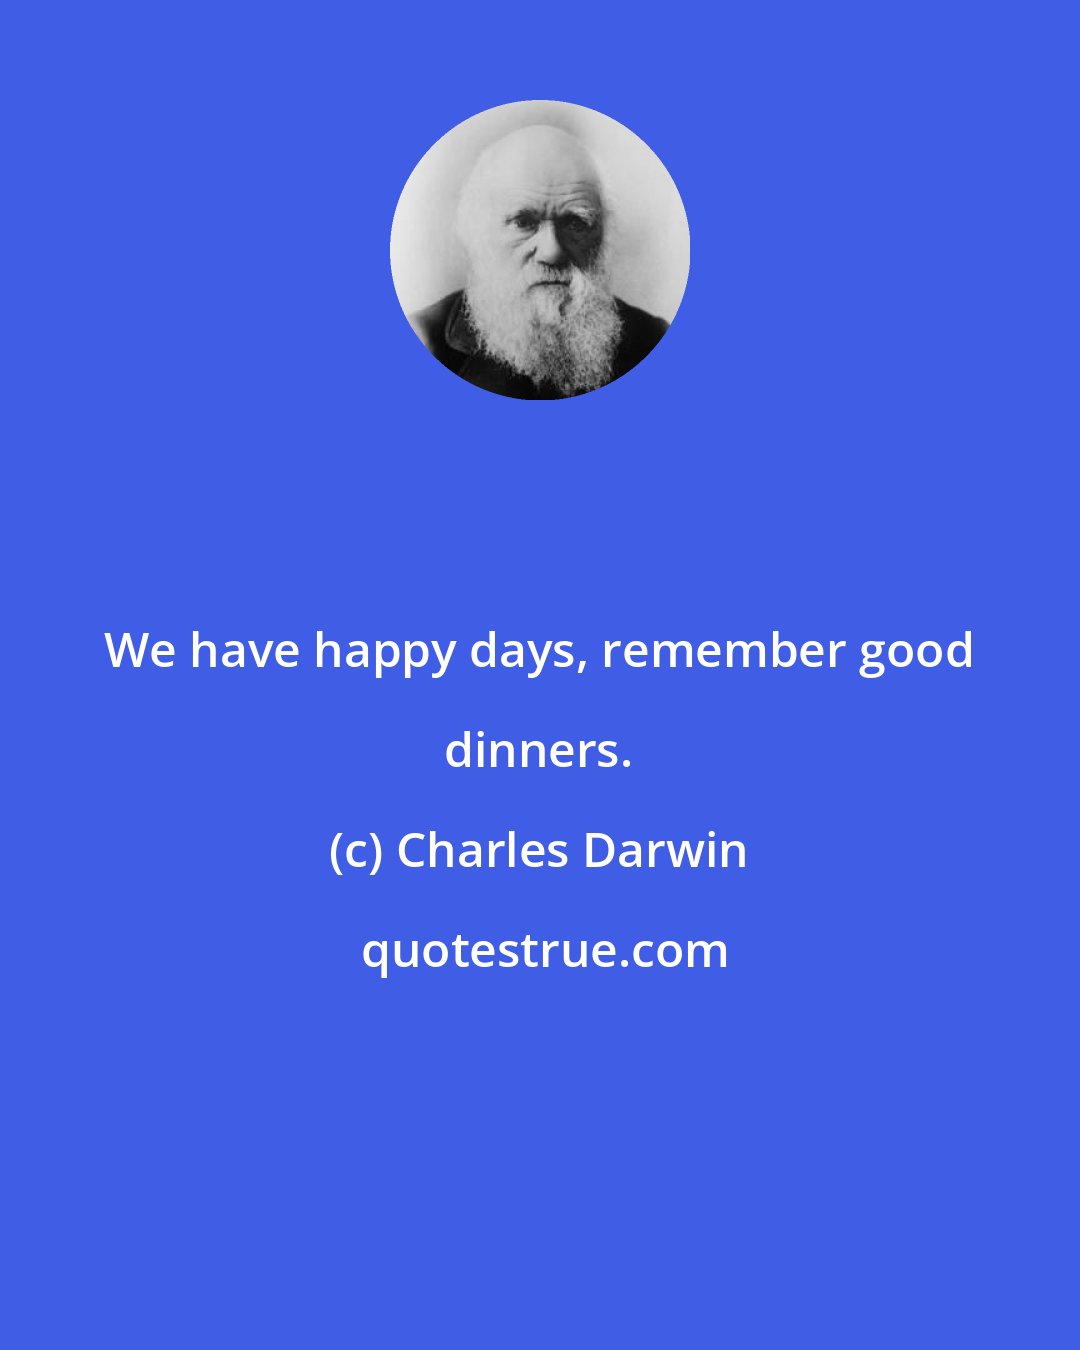 Charles Darwin: We have happy days, remember good dinners.